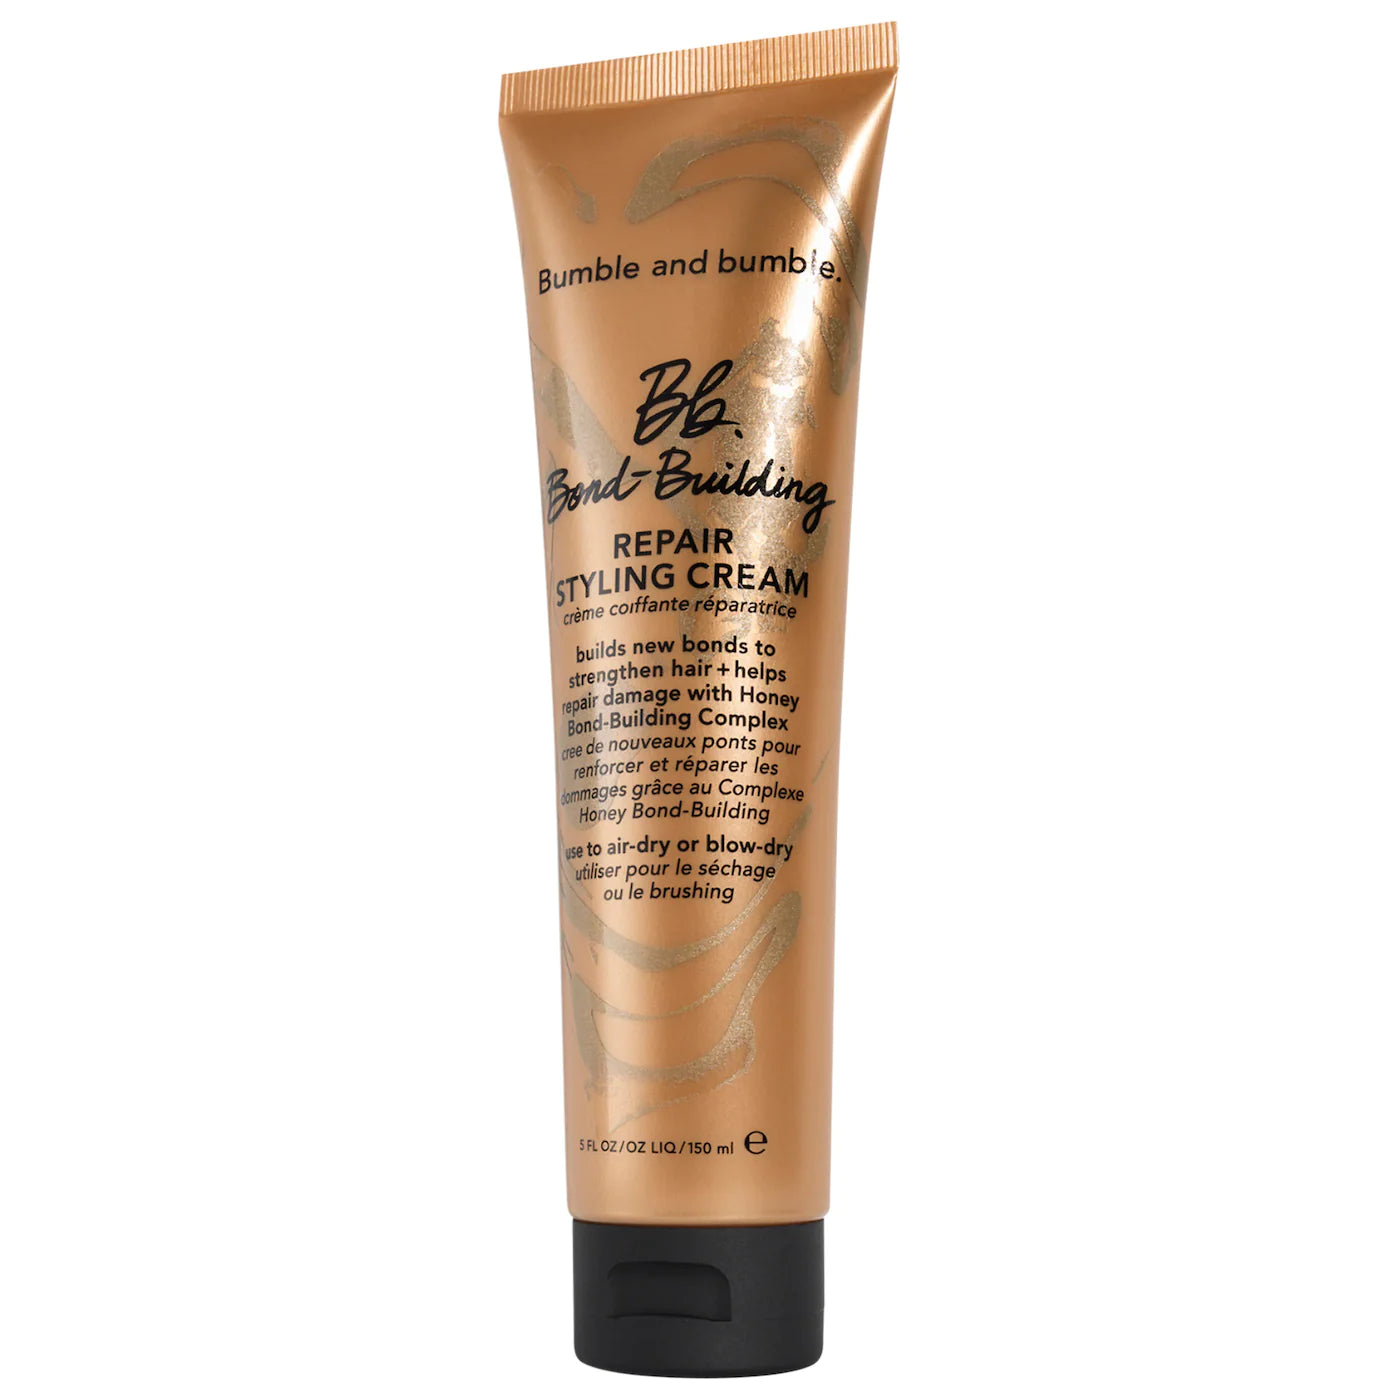 Bumble and bumble Repair Styling Cream